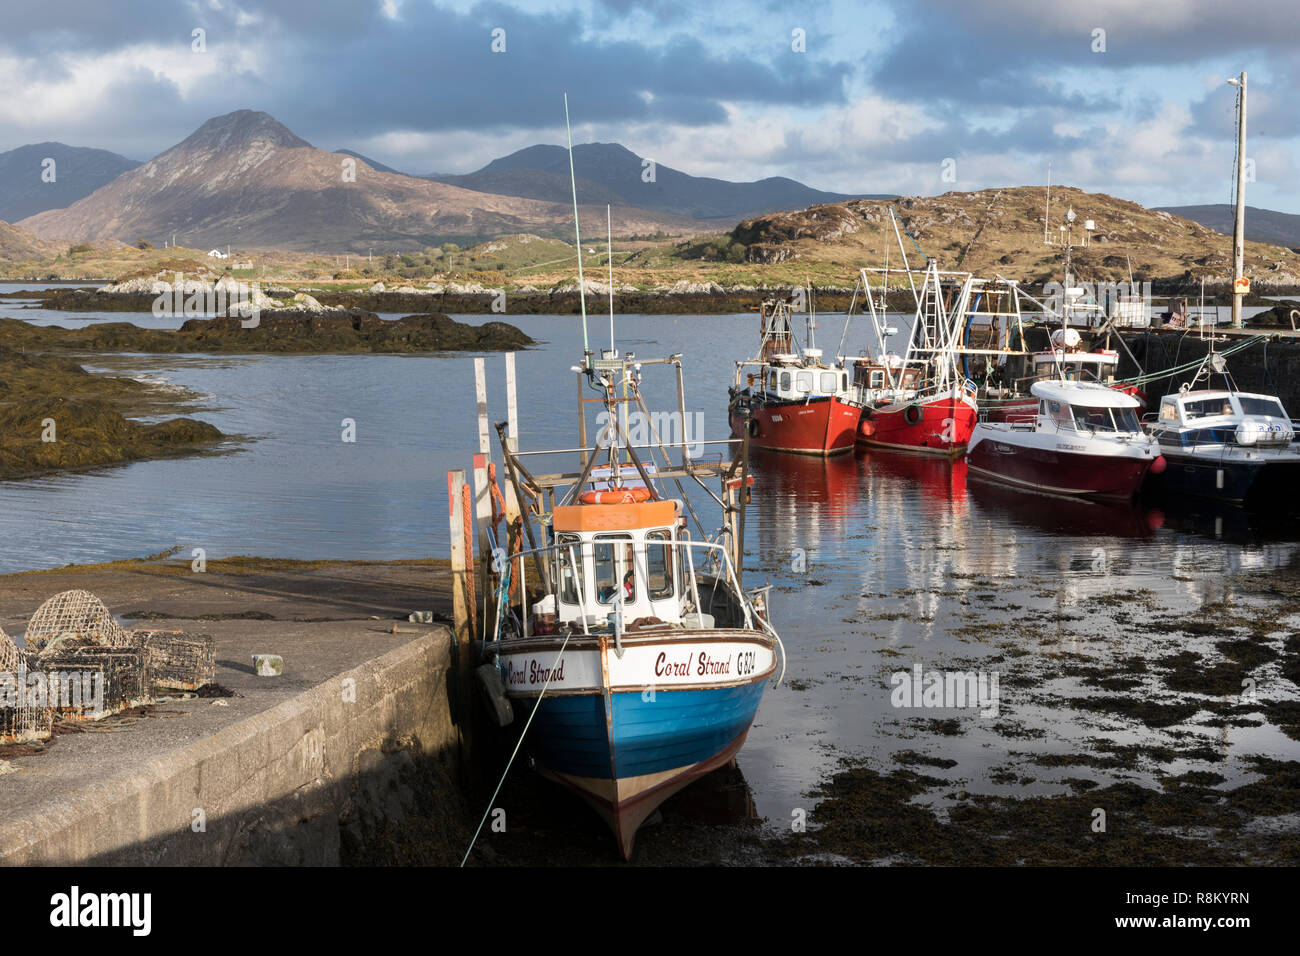 Ireland, County Galway, Ballynakill, Connemara, wooden boats and fishing boats in the harbor, Tully Mountains and Twelve Bens mountains in the background Stock Photo